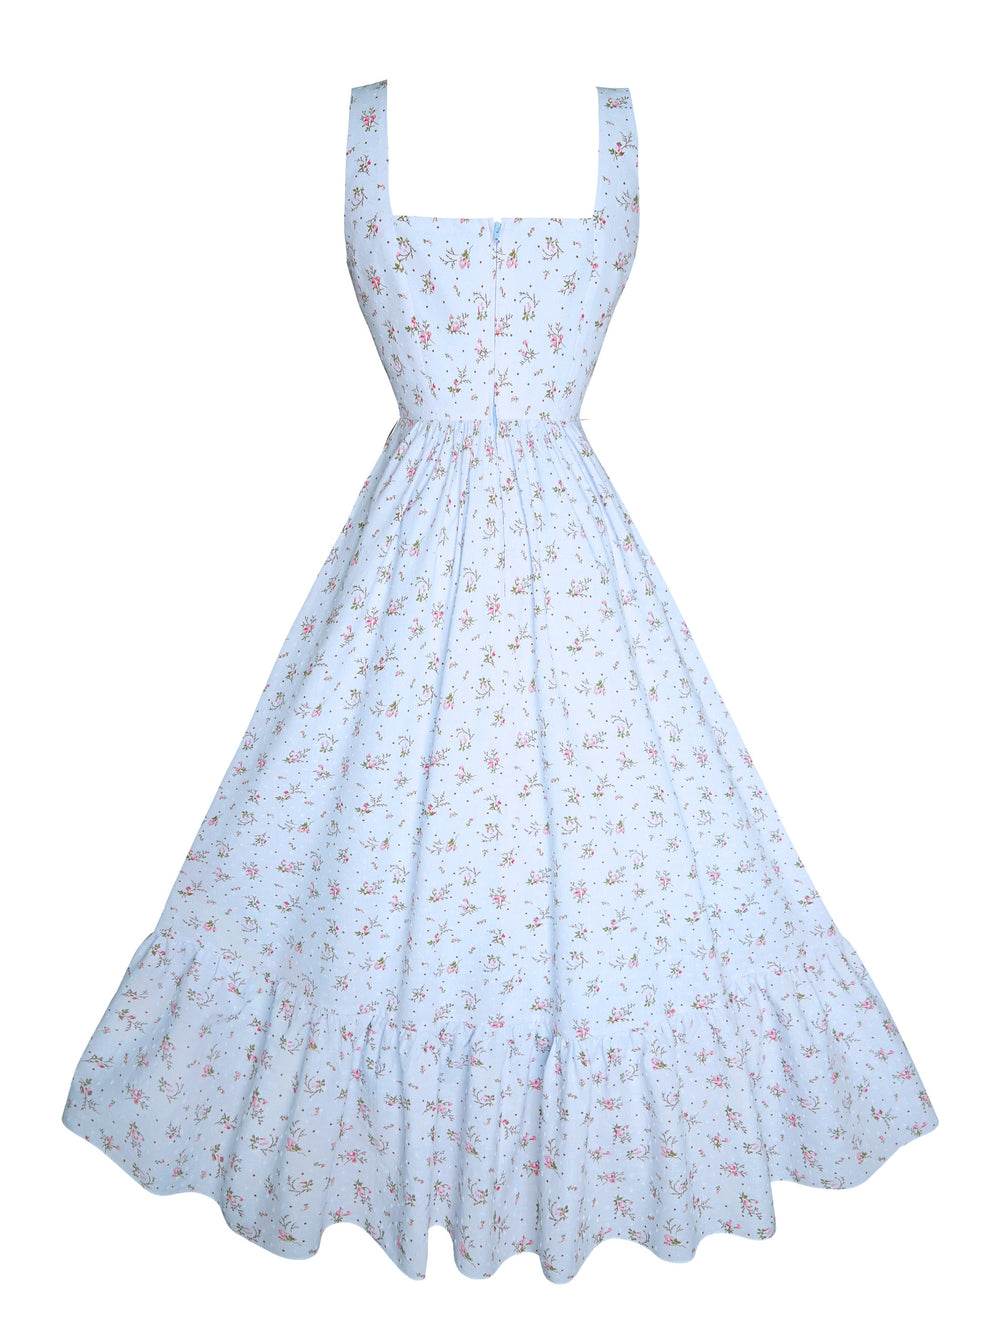 MTO - Henrietta Dress in Blue "Ditzy Floral" Dotted Swiss